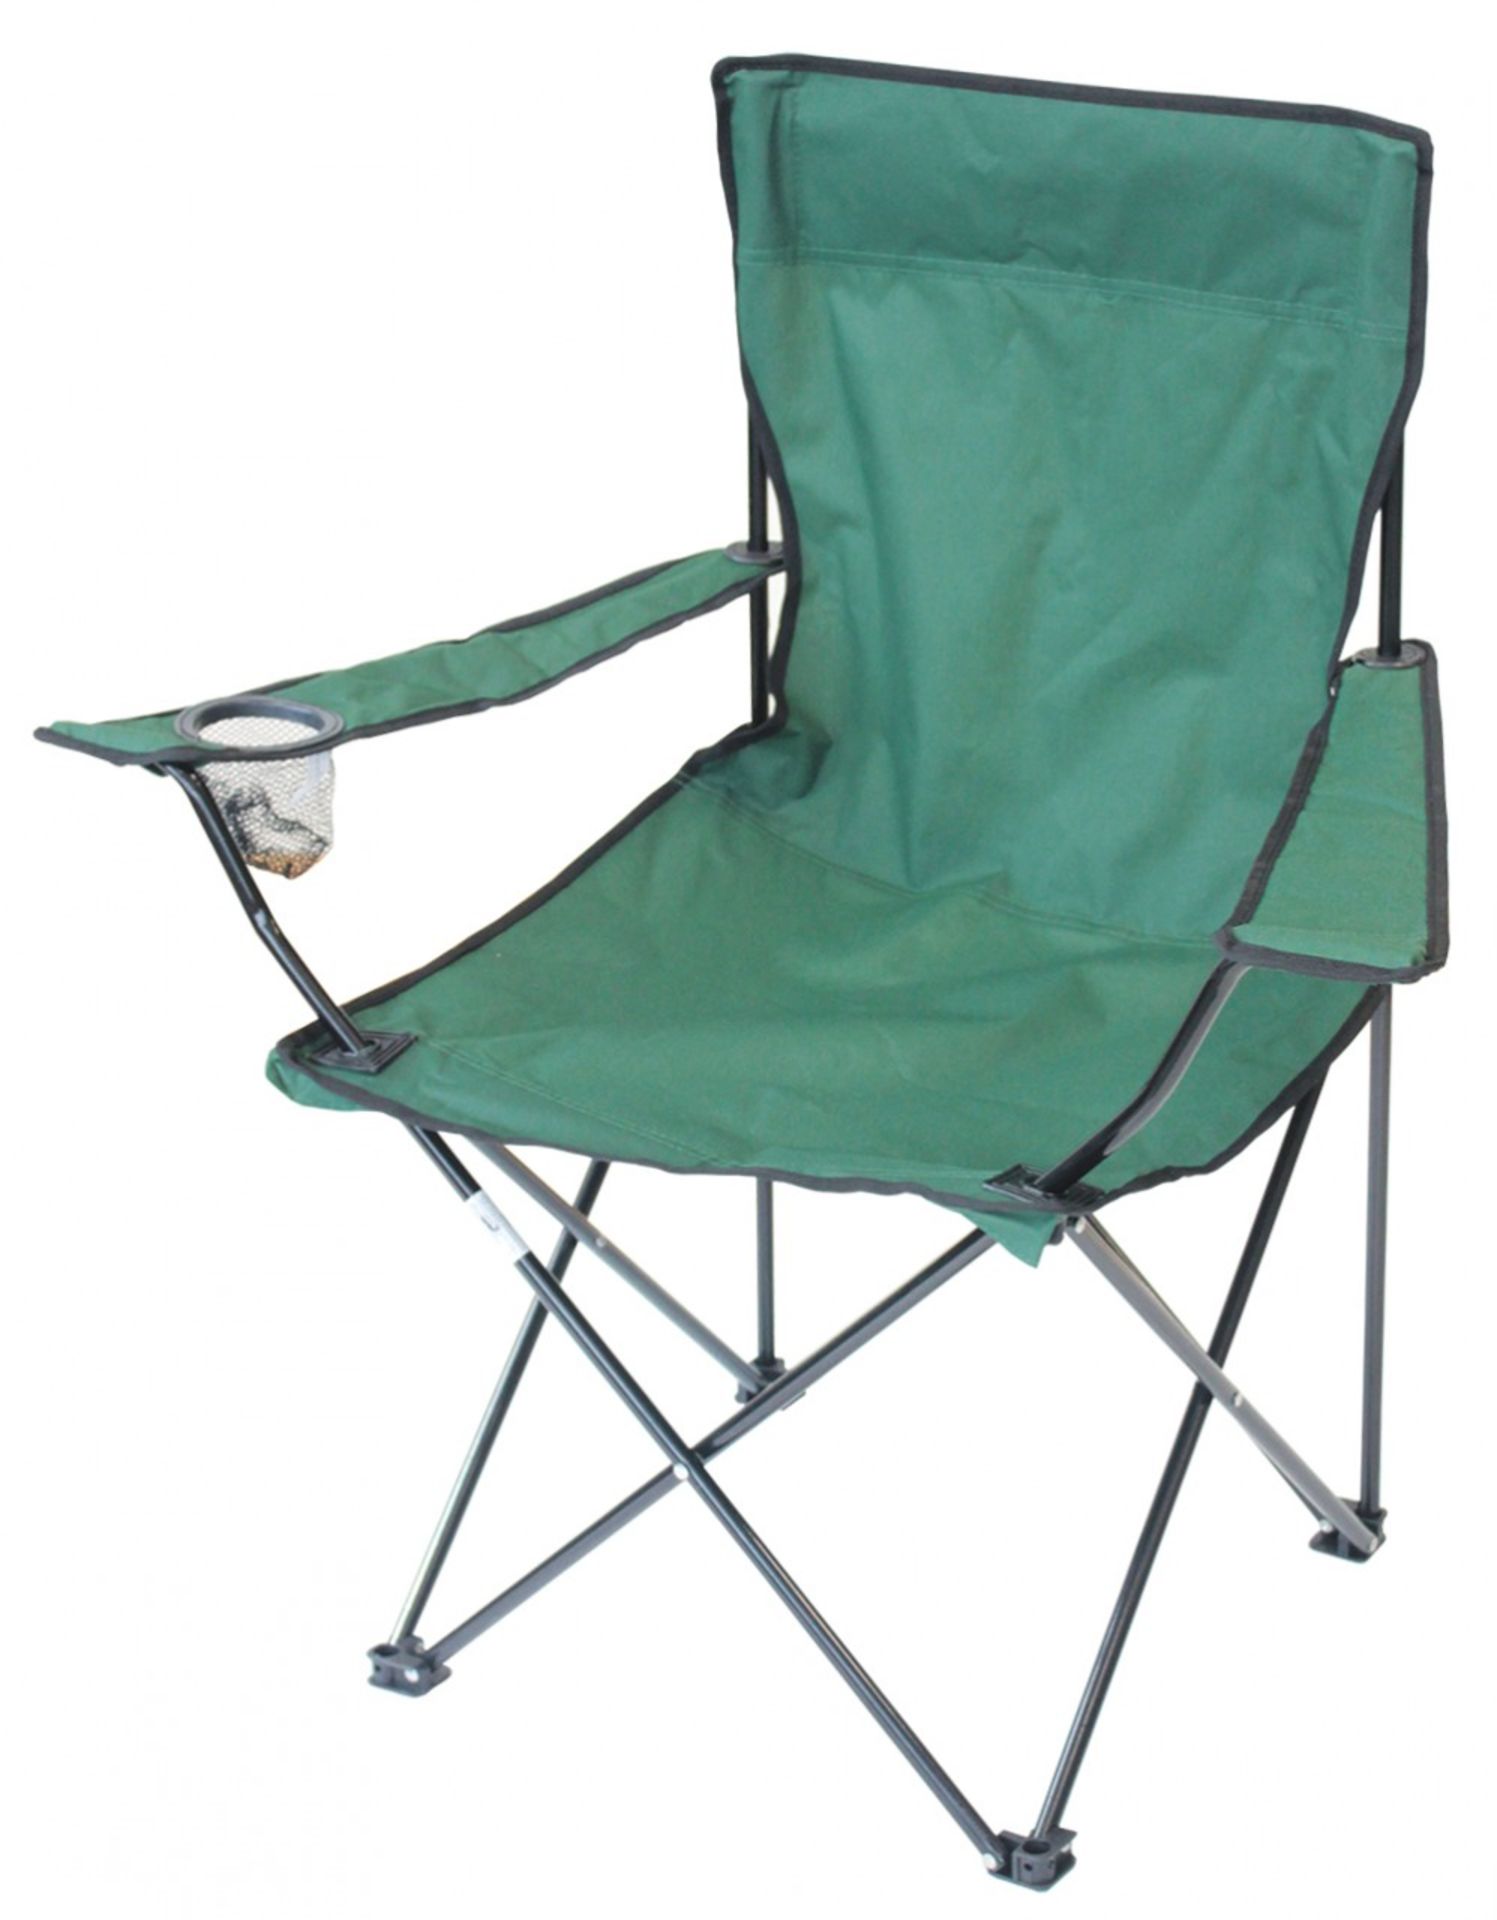 V *TRADE QTY* Brand New Folding Outdoor Chair with Cup Holder RRP £15 (similar Millets) X 4 YOUR BID